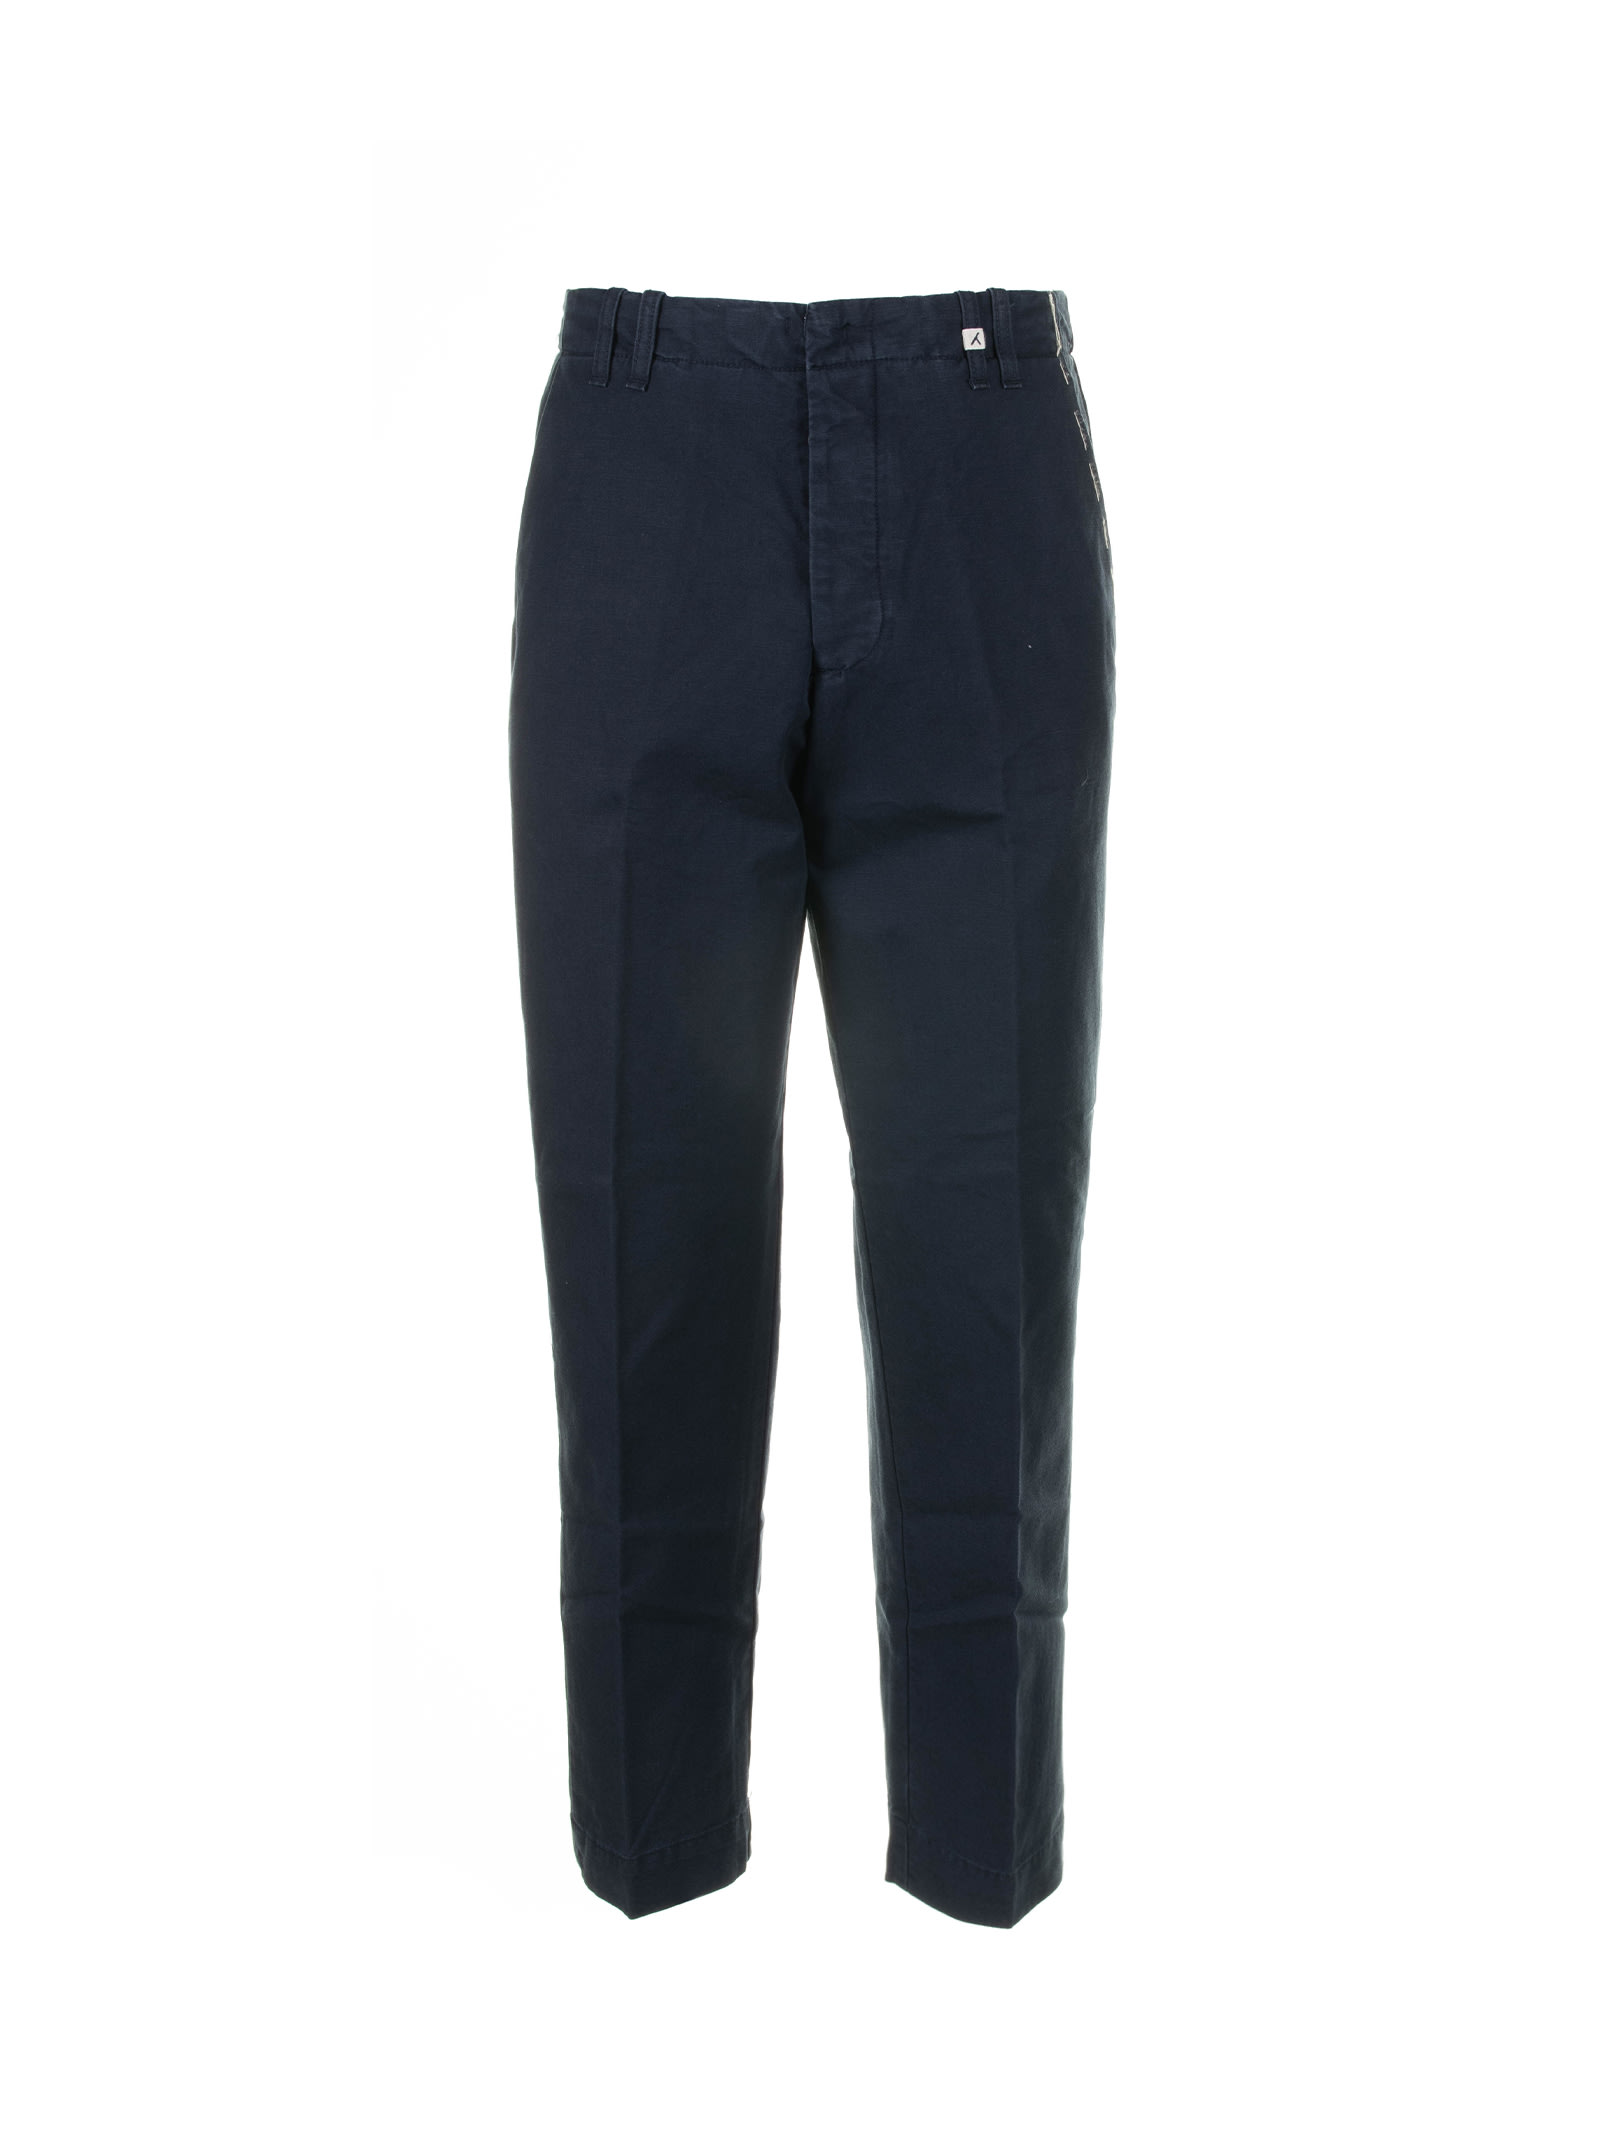 Mens Navy Blue Trousers